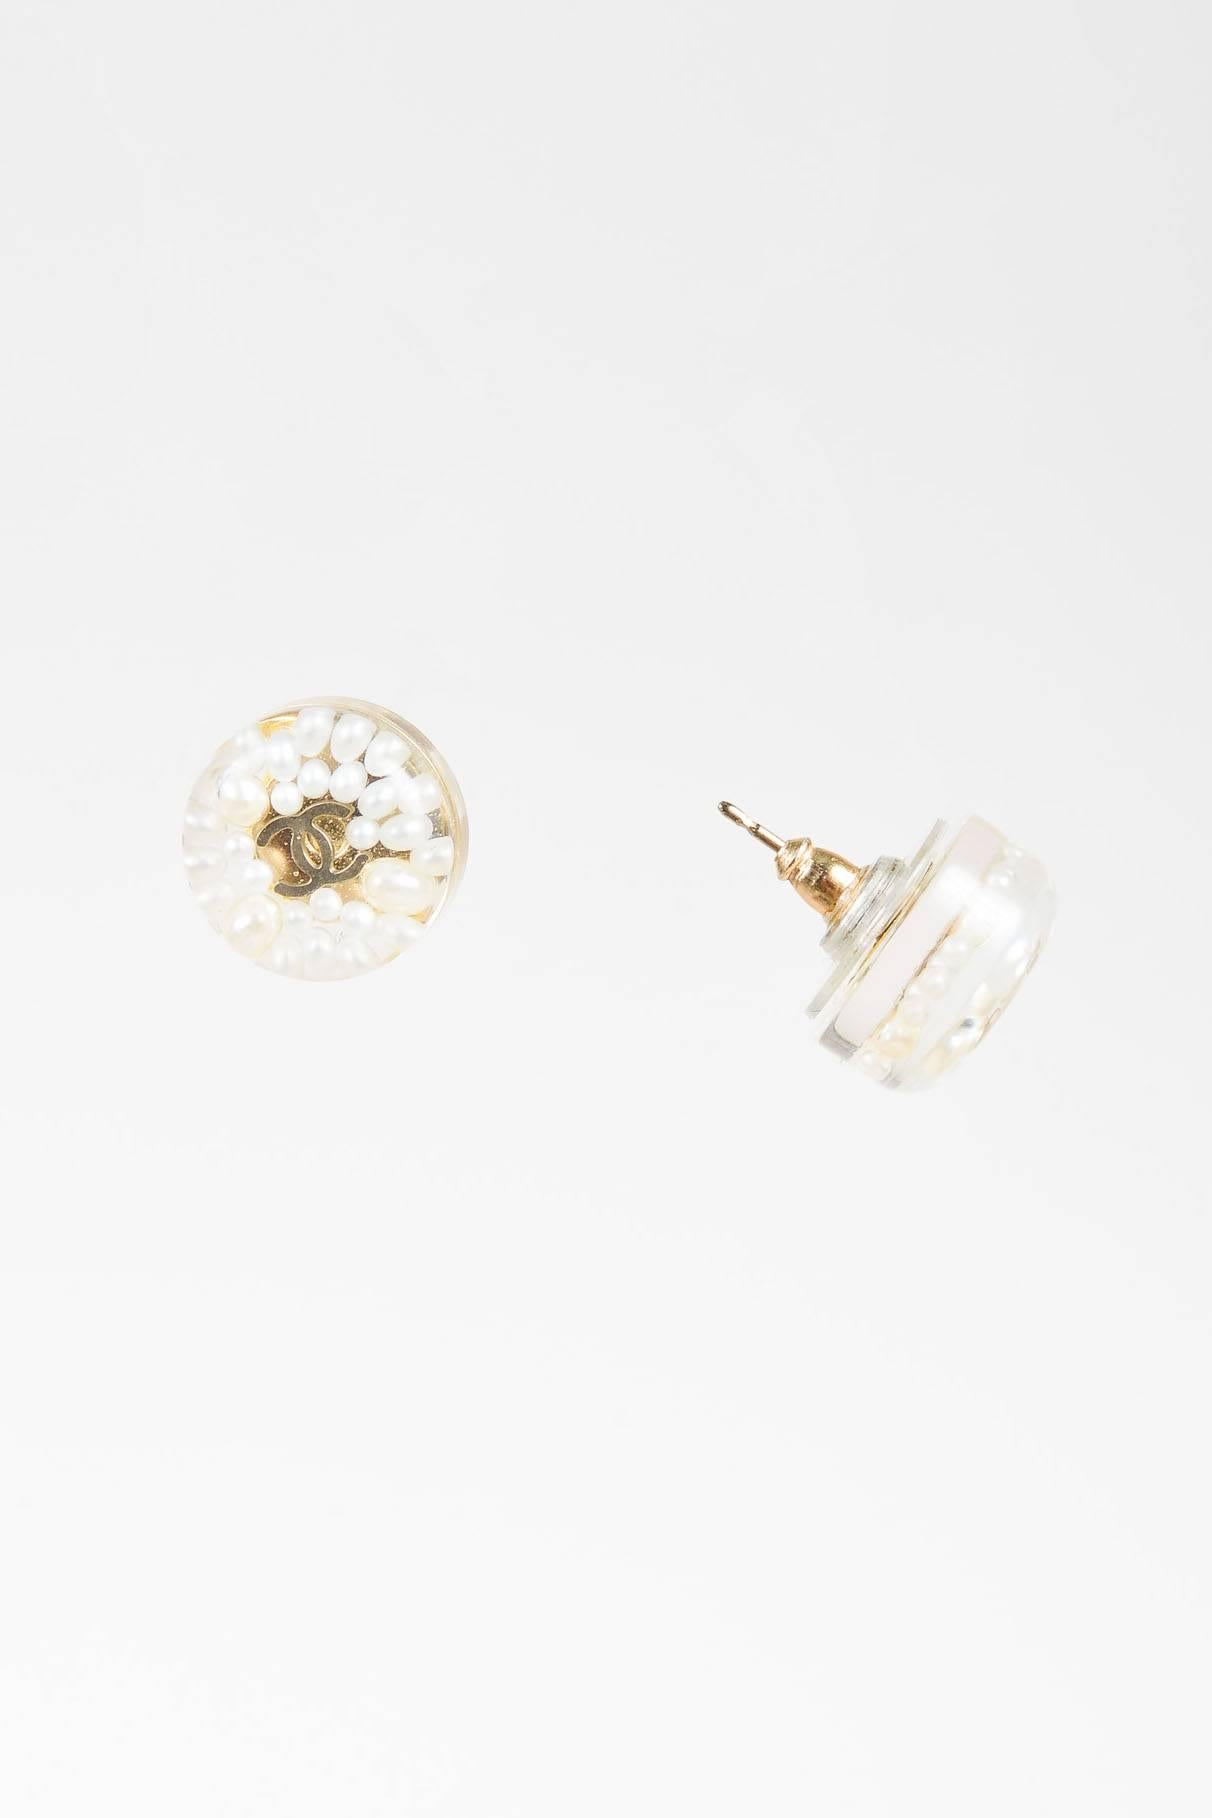 Chanel Transparent Faux Pearl Embellished 'CC' Logo Post Stud Earrings In Good Condition For Sale In Chicago, IL